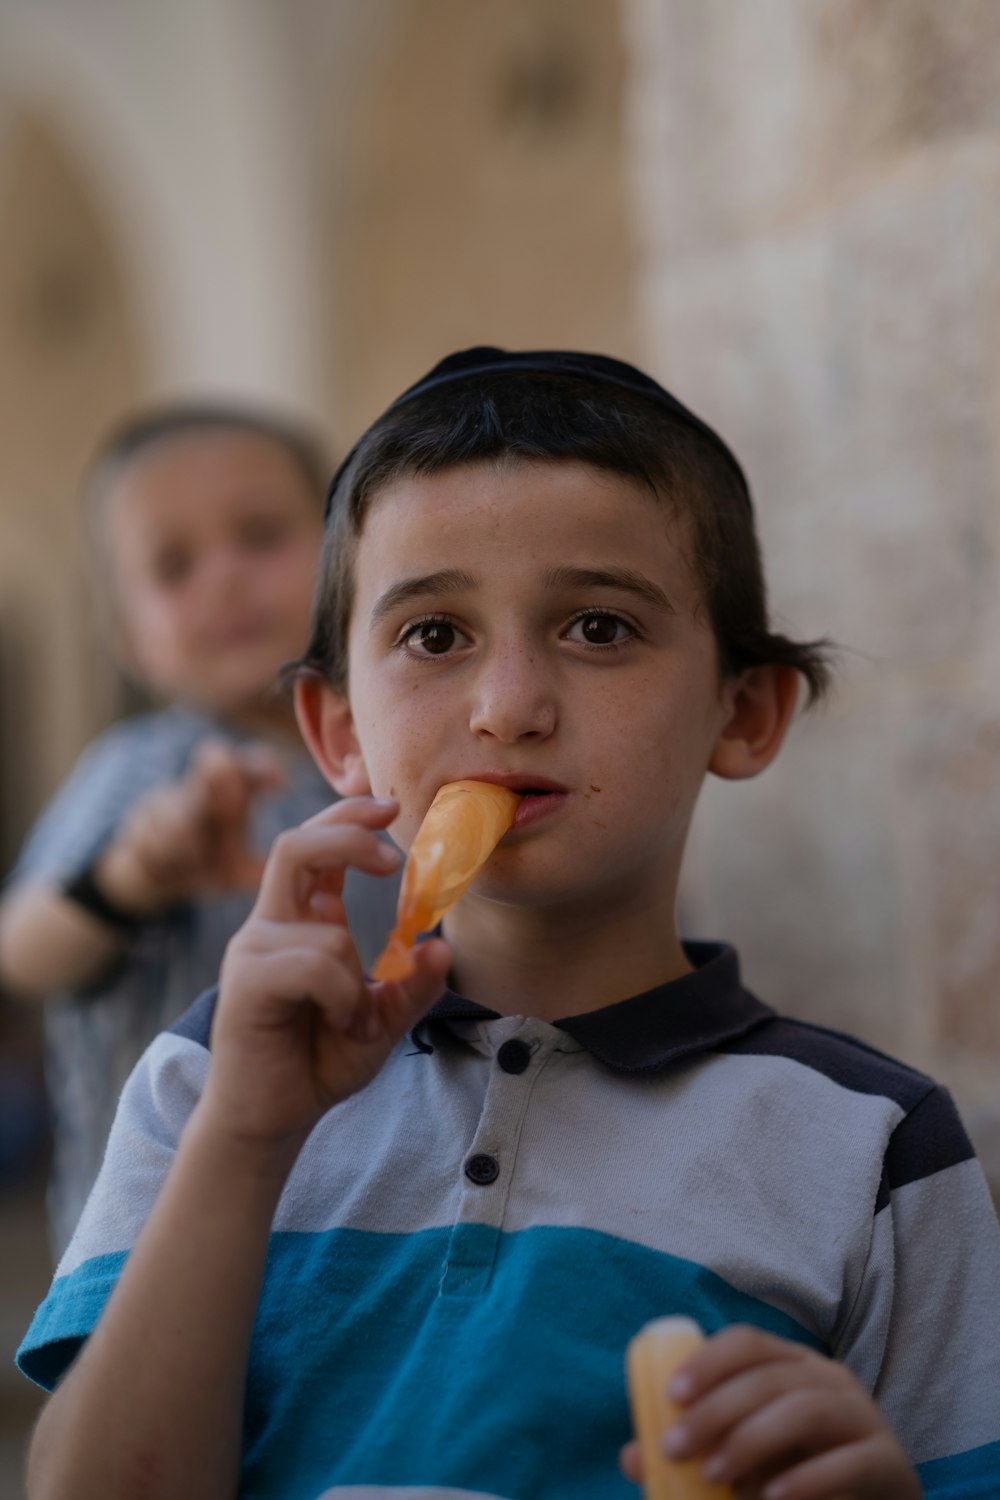 a young boy holding a piece of food in his mouth